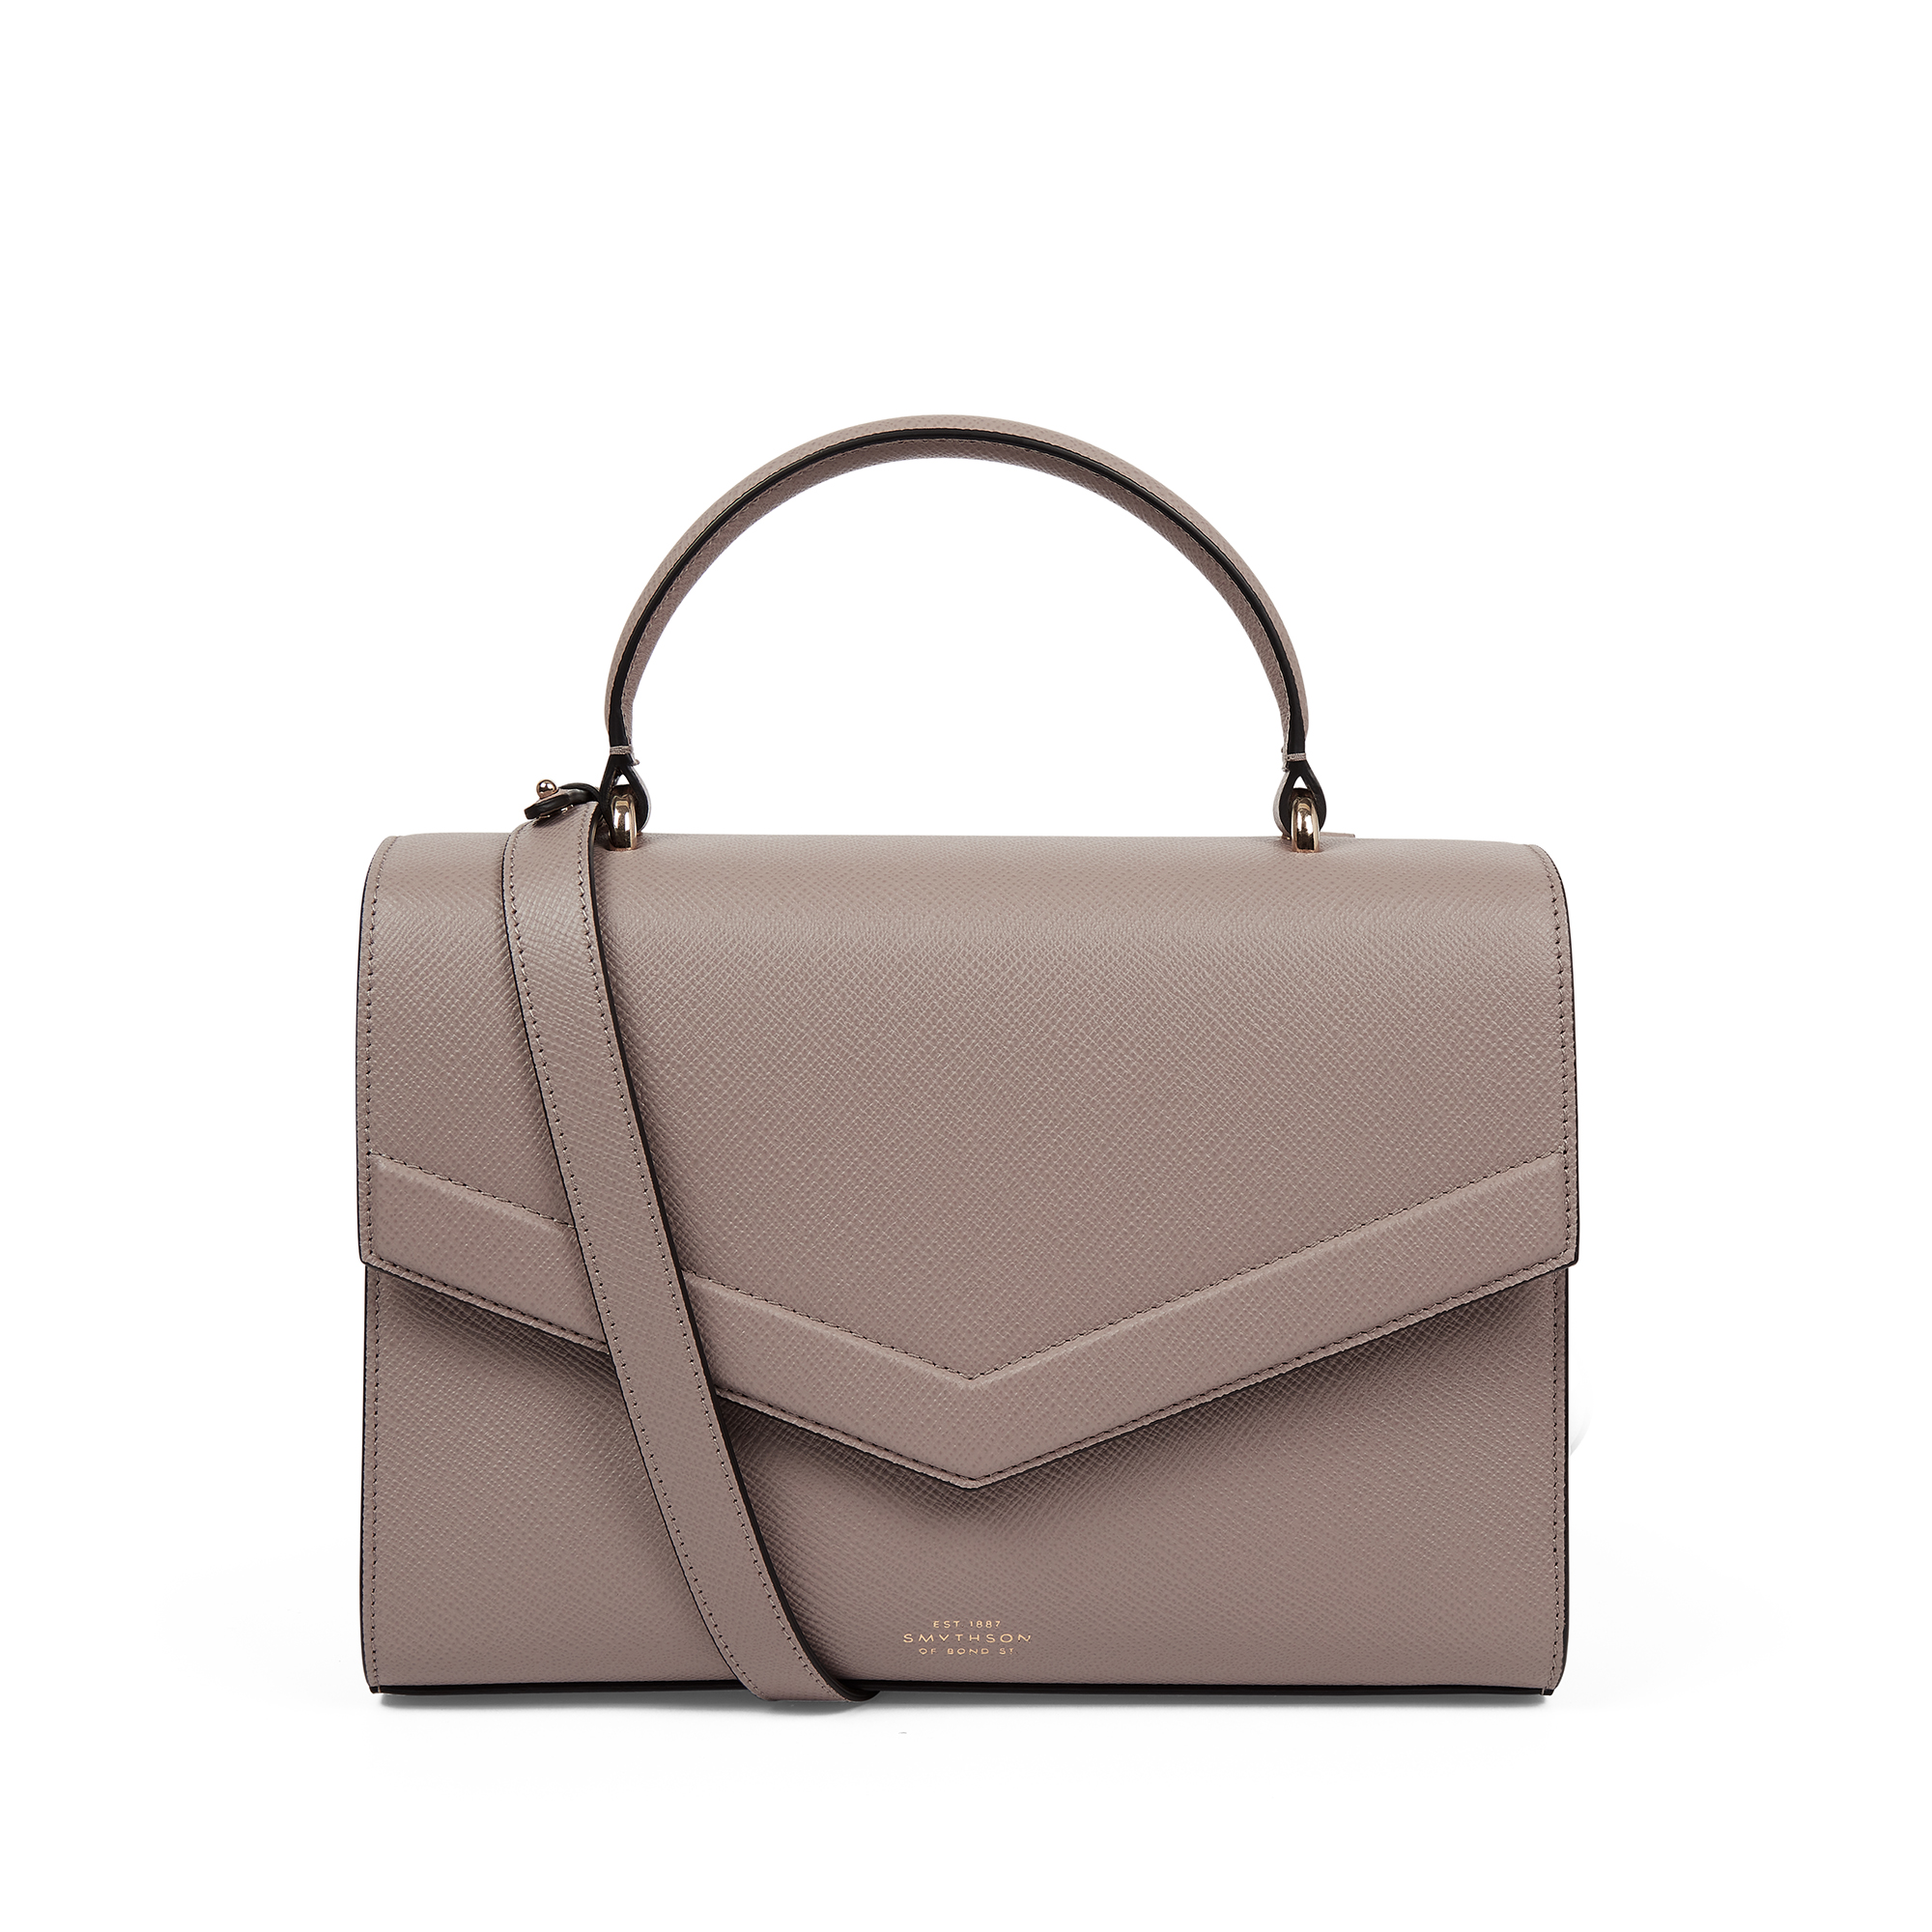 Smythson Envelope Top Handle Bag In Panama In Taupe